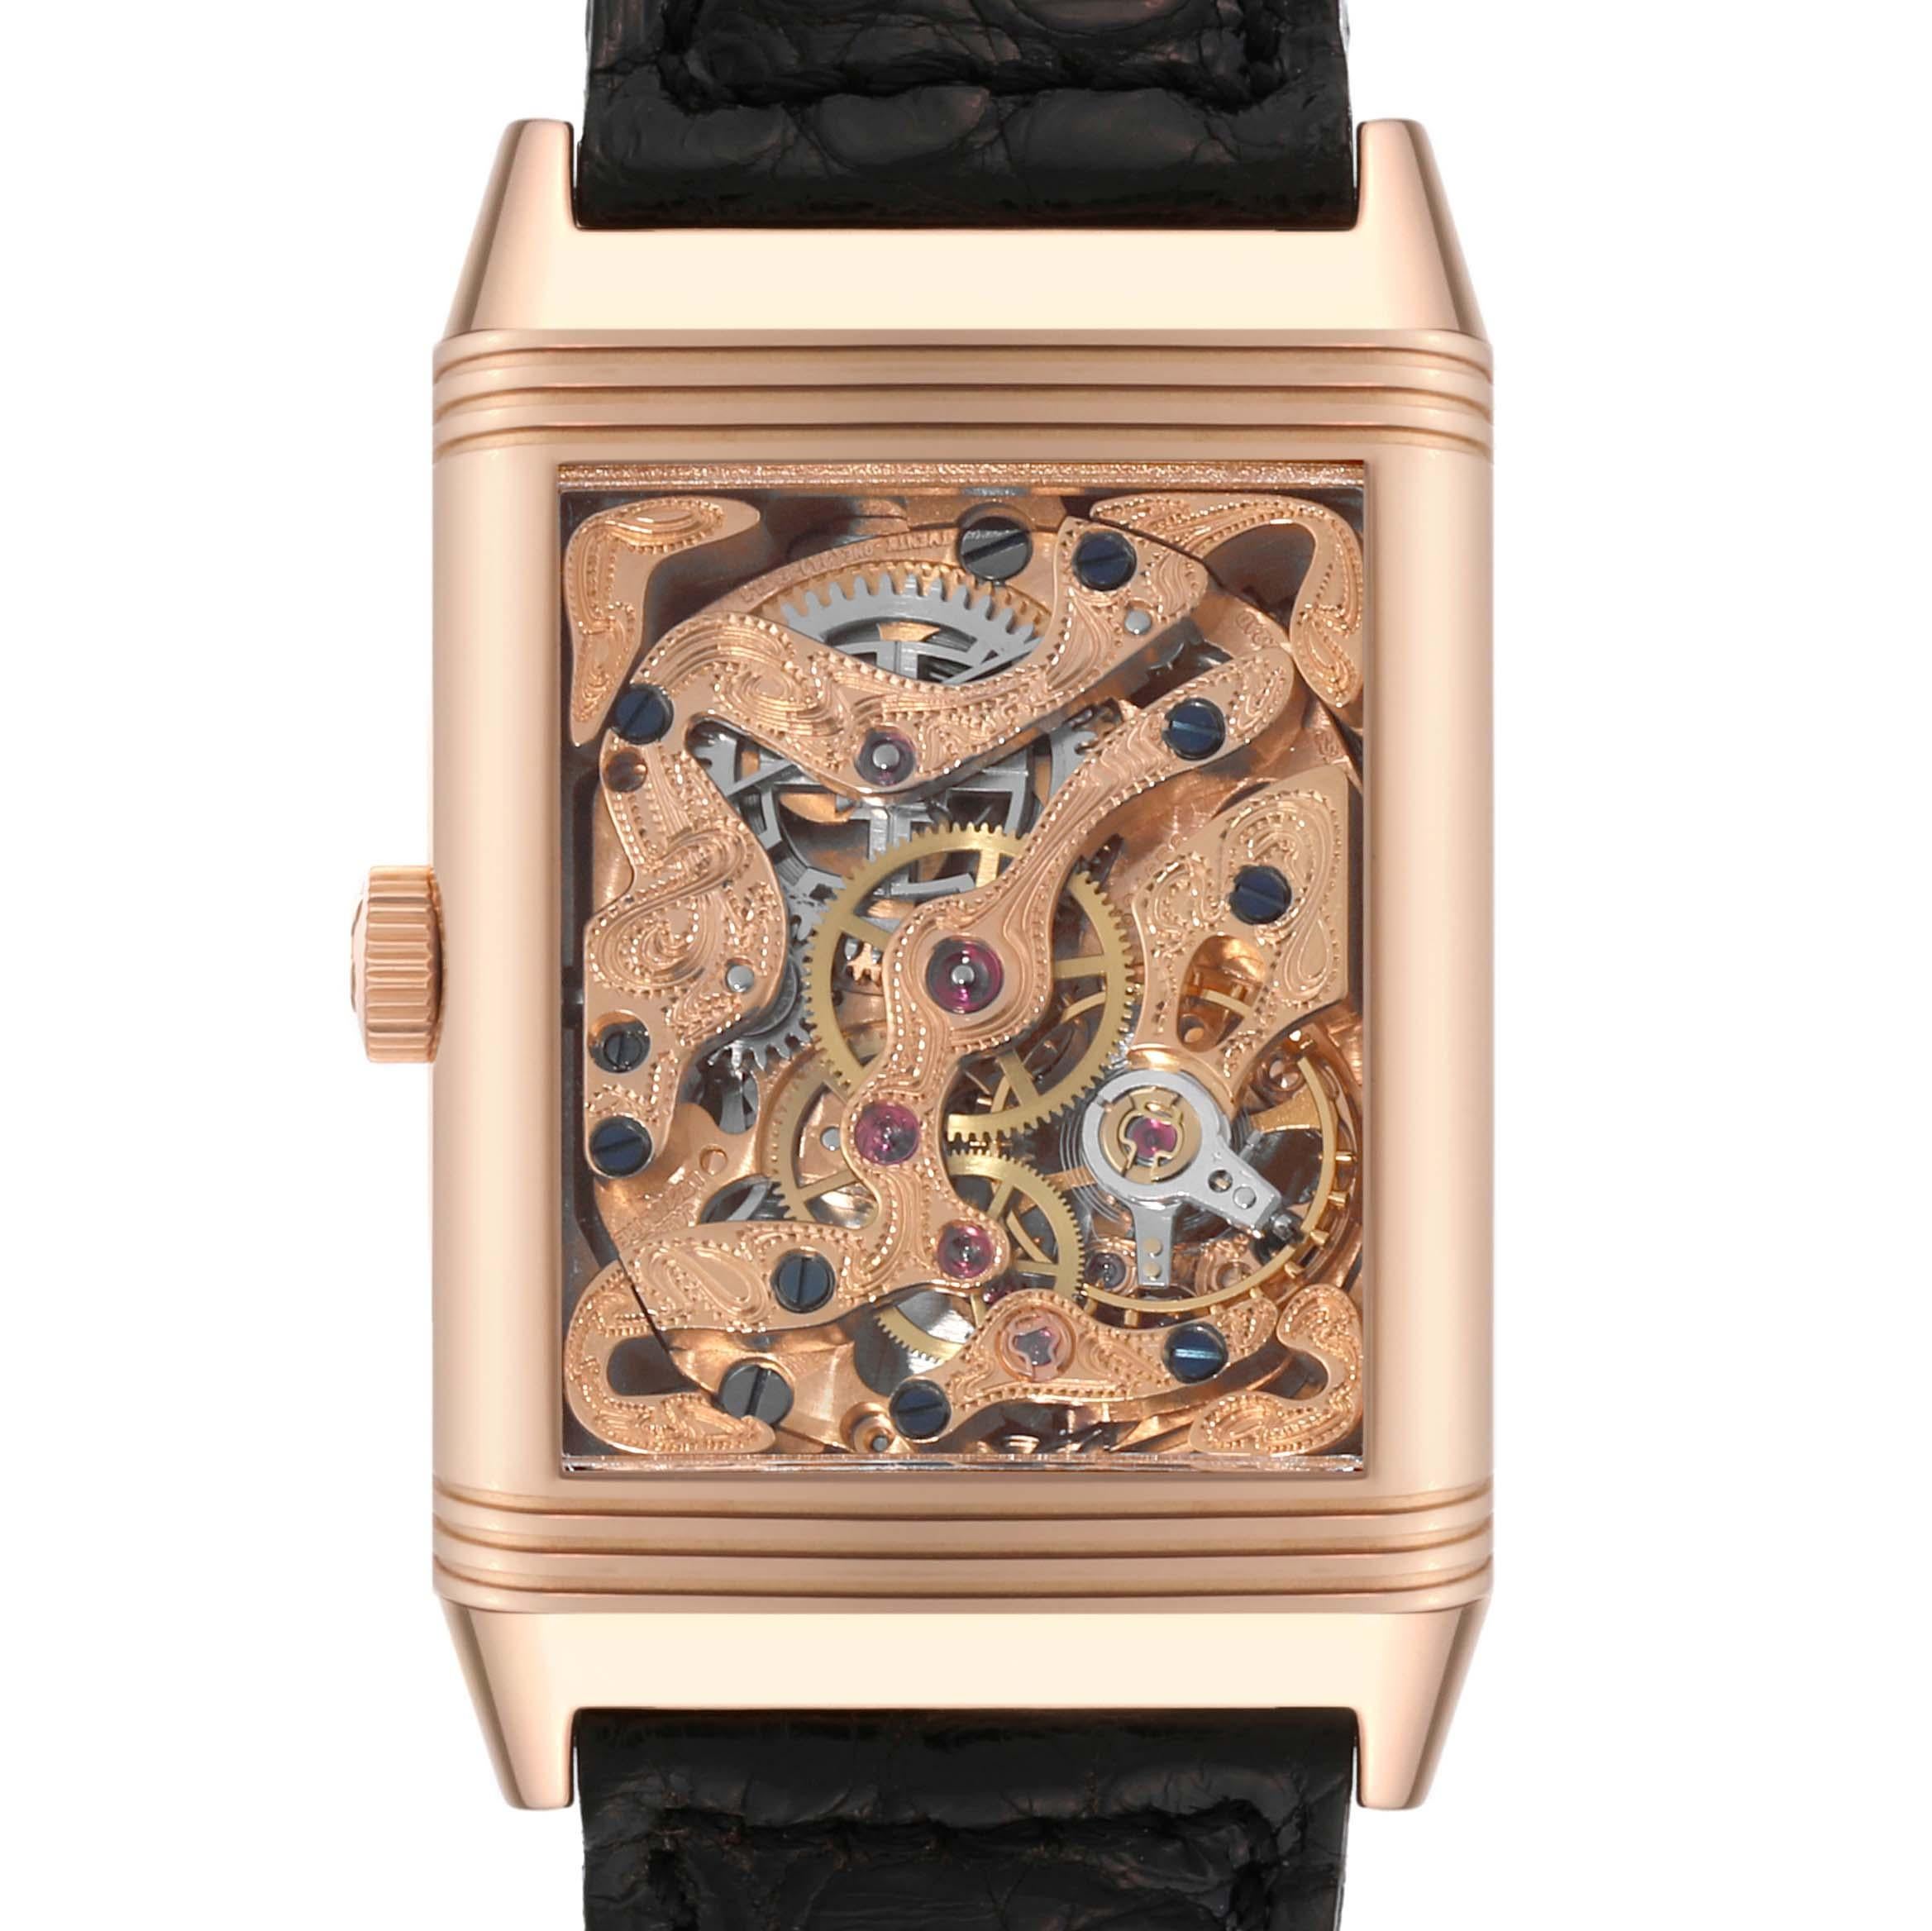 Jaeger LeCoultre Reverso Art Deco Rose Gold Silver Dial Mens Watch 270.2.62. Manual-winding movement. 18K rose gold 42.0 x 26.0 mm rectangular case with reeded ends rotating within its back plate. 18K rose gold reeded bezel. Scratch resistant